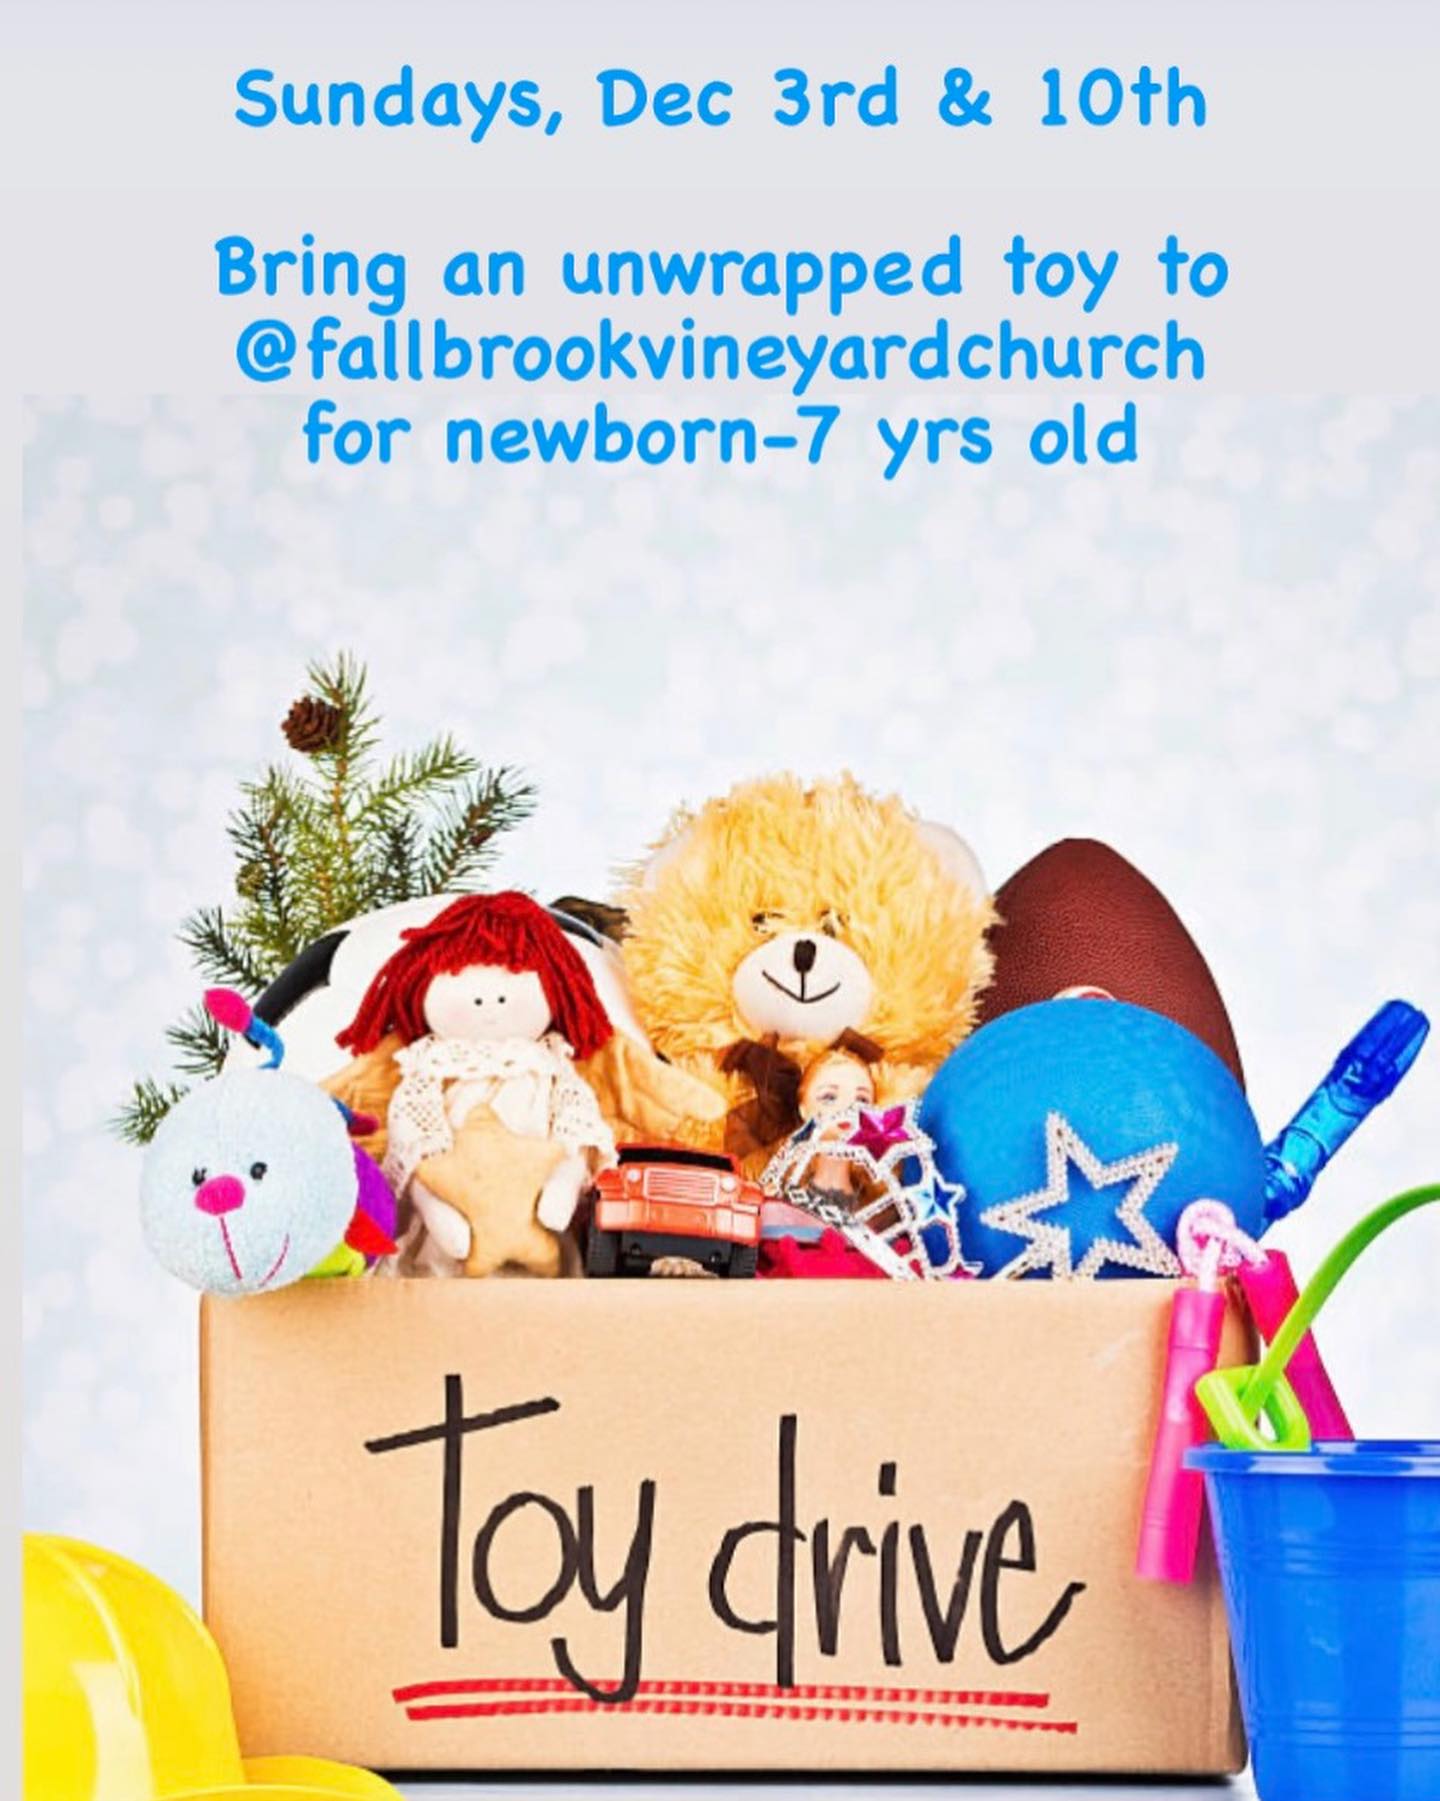 Two opportunities to be a Christmas blessing to our community! @hopeclinicforwomen and @fallbrookfoodpantry lovingly serve our neighbors in need and they are grateful for the continued support of @fallbrookvineyardchurch . Sundays, 12/3 and 12/10, bring unwrapped toys for ages newborn-7 years old. Sundays 12/17 and 12/24, bring Ensure and adult diapers. We love because Christ first loved us ️Thank you @laura.quaid for leading this giving effort.